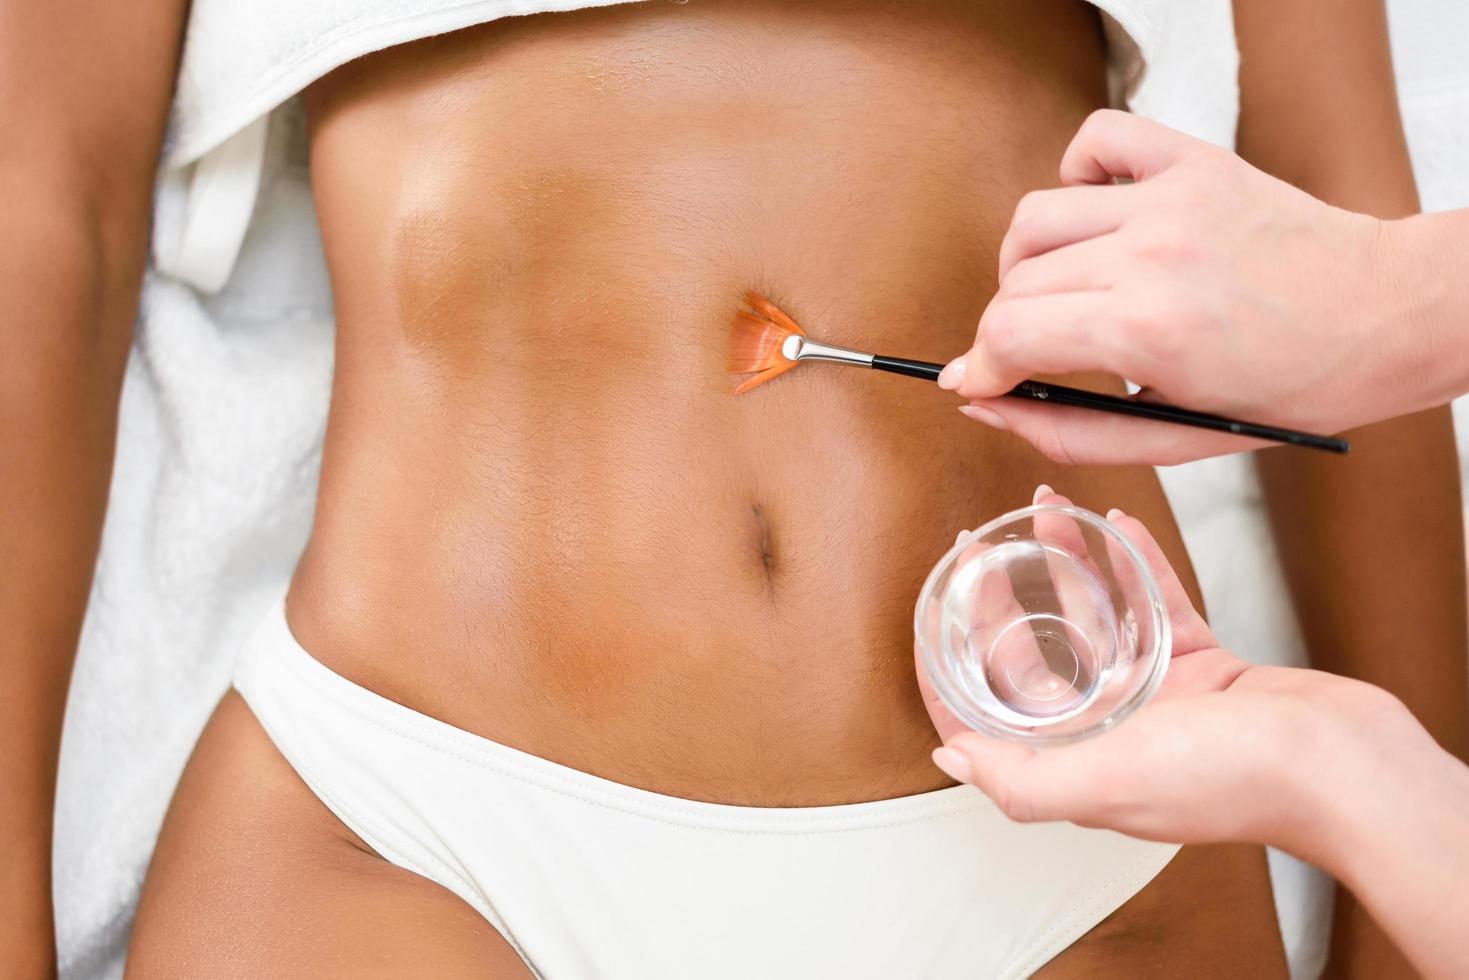 Pechoti Method: What Happens When You Oil Your Belly Button?